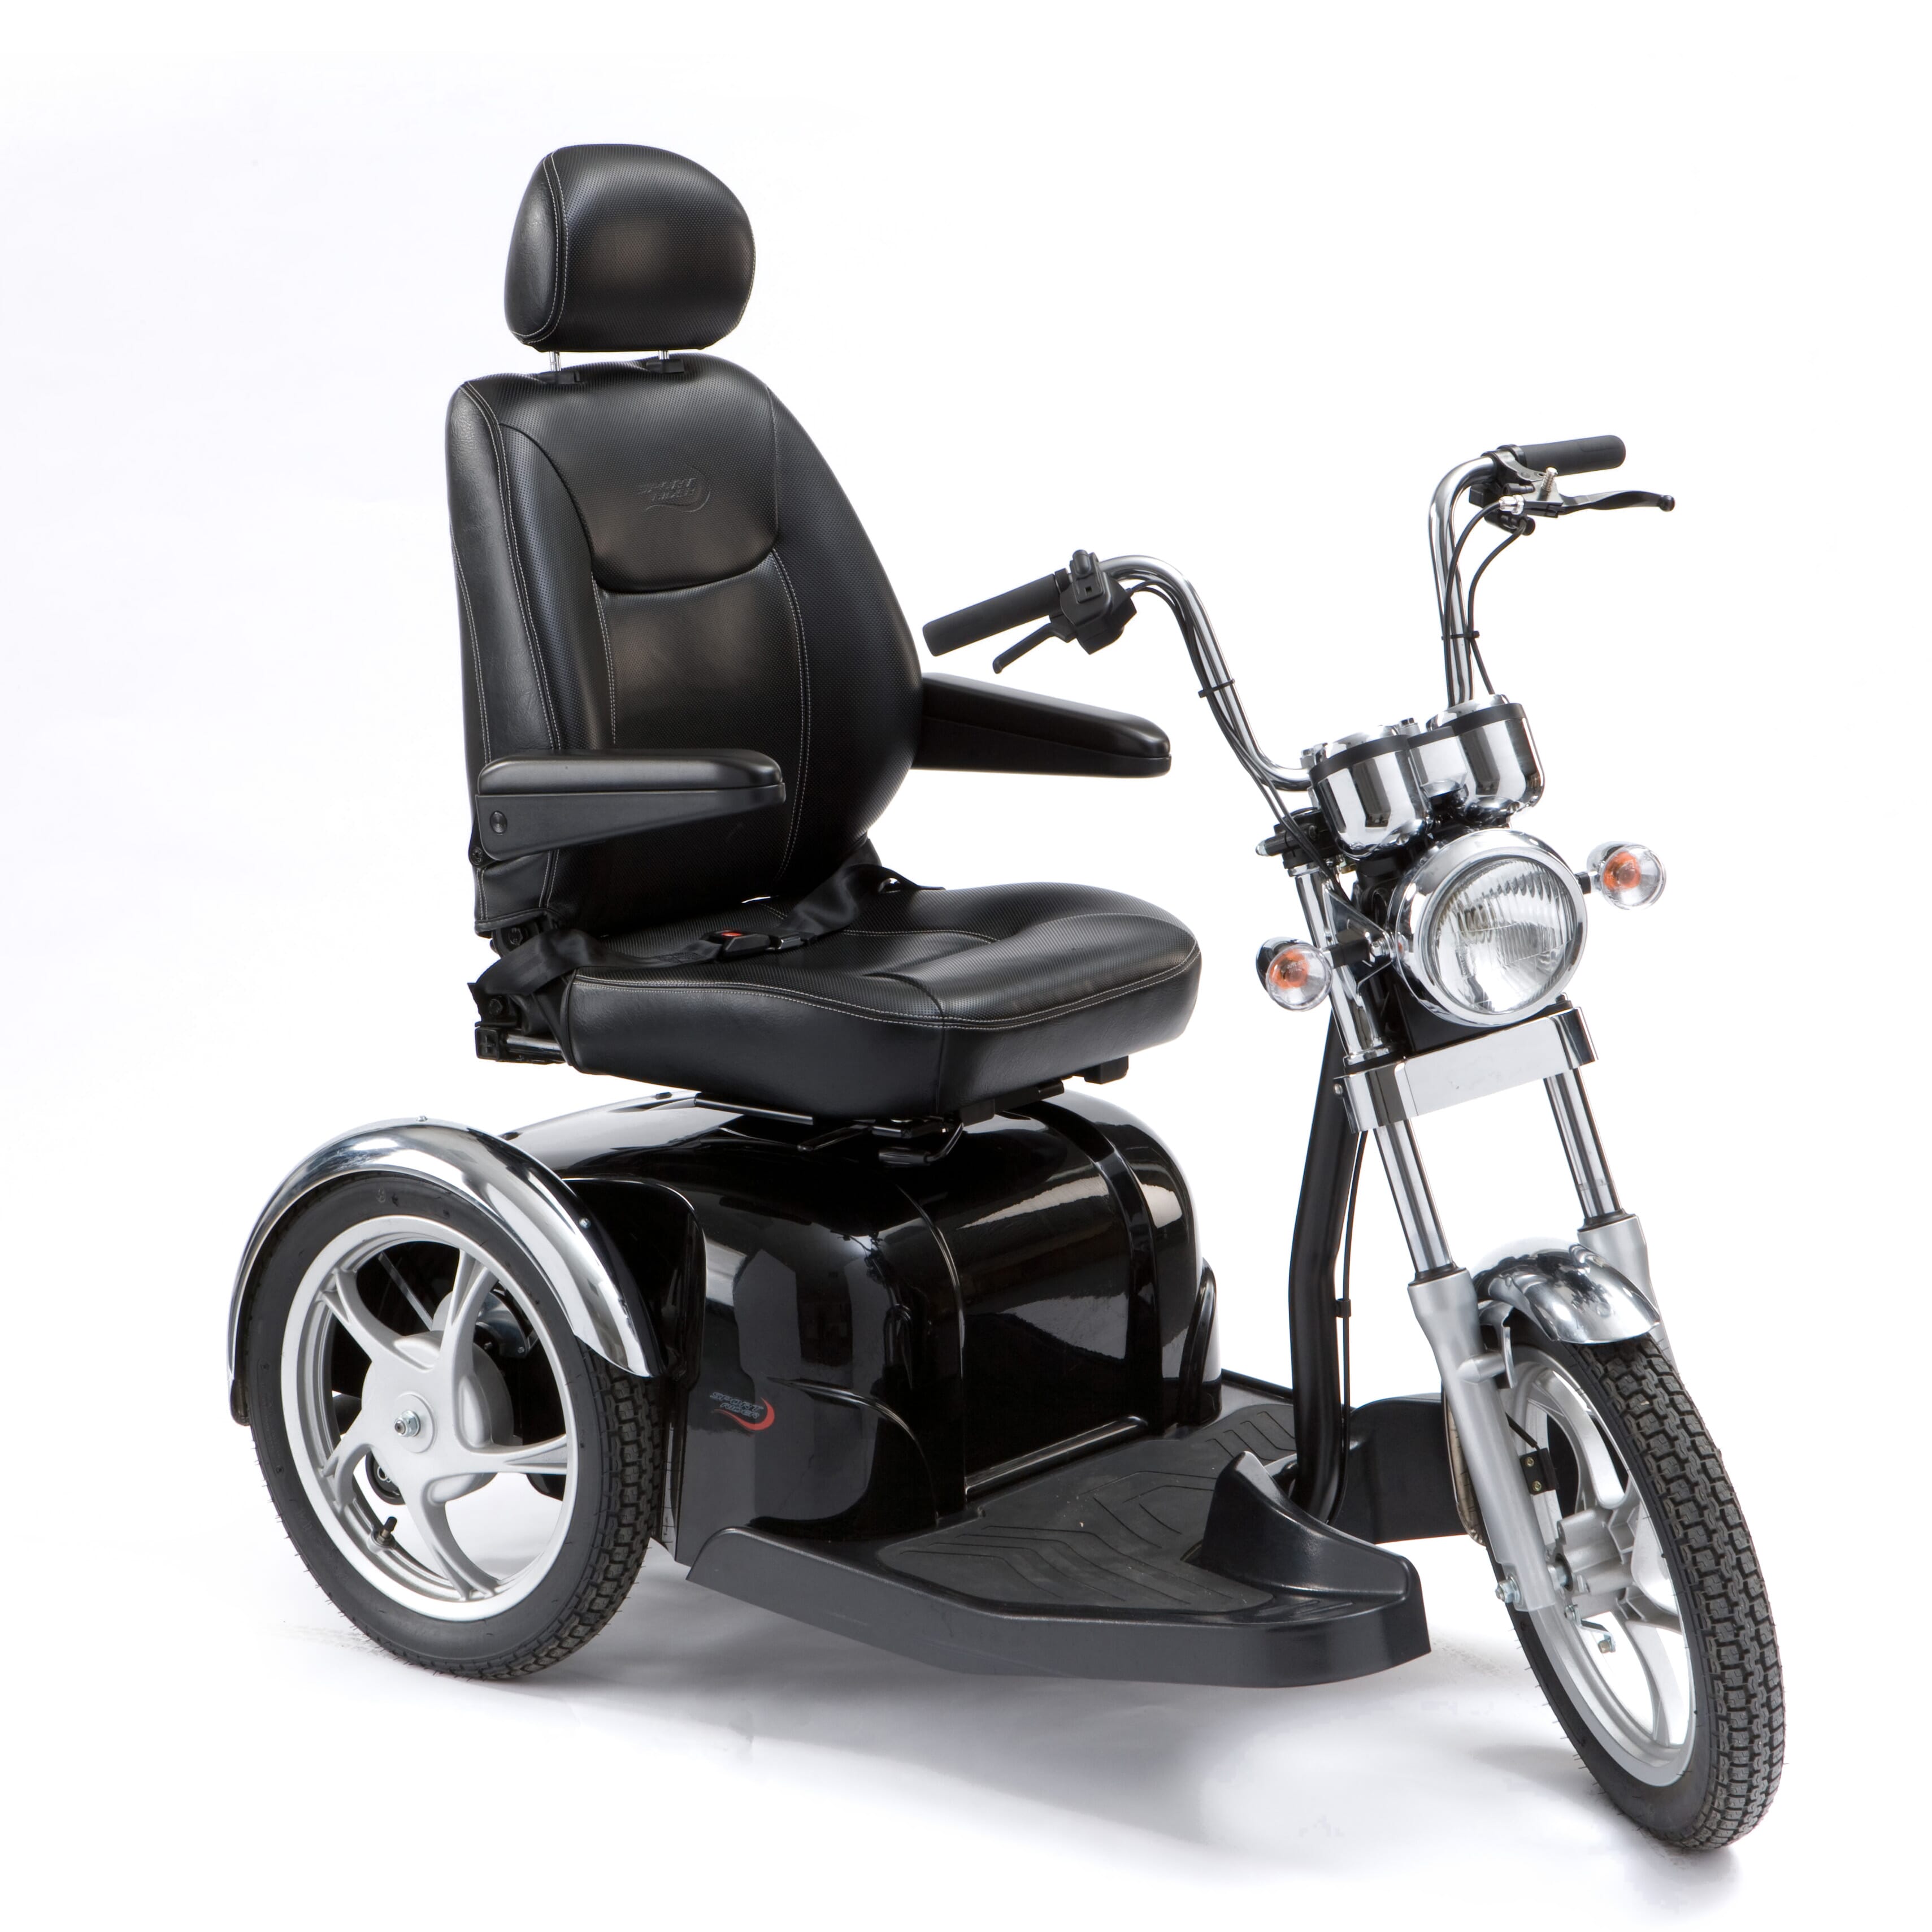 View Drive Sport Rider Mobility Scooter information